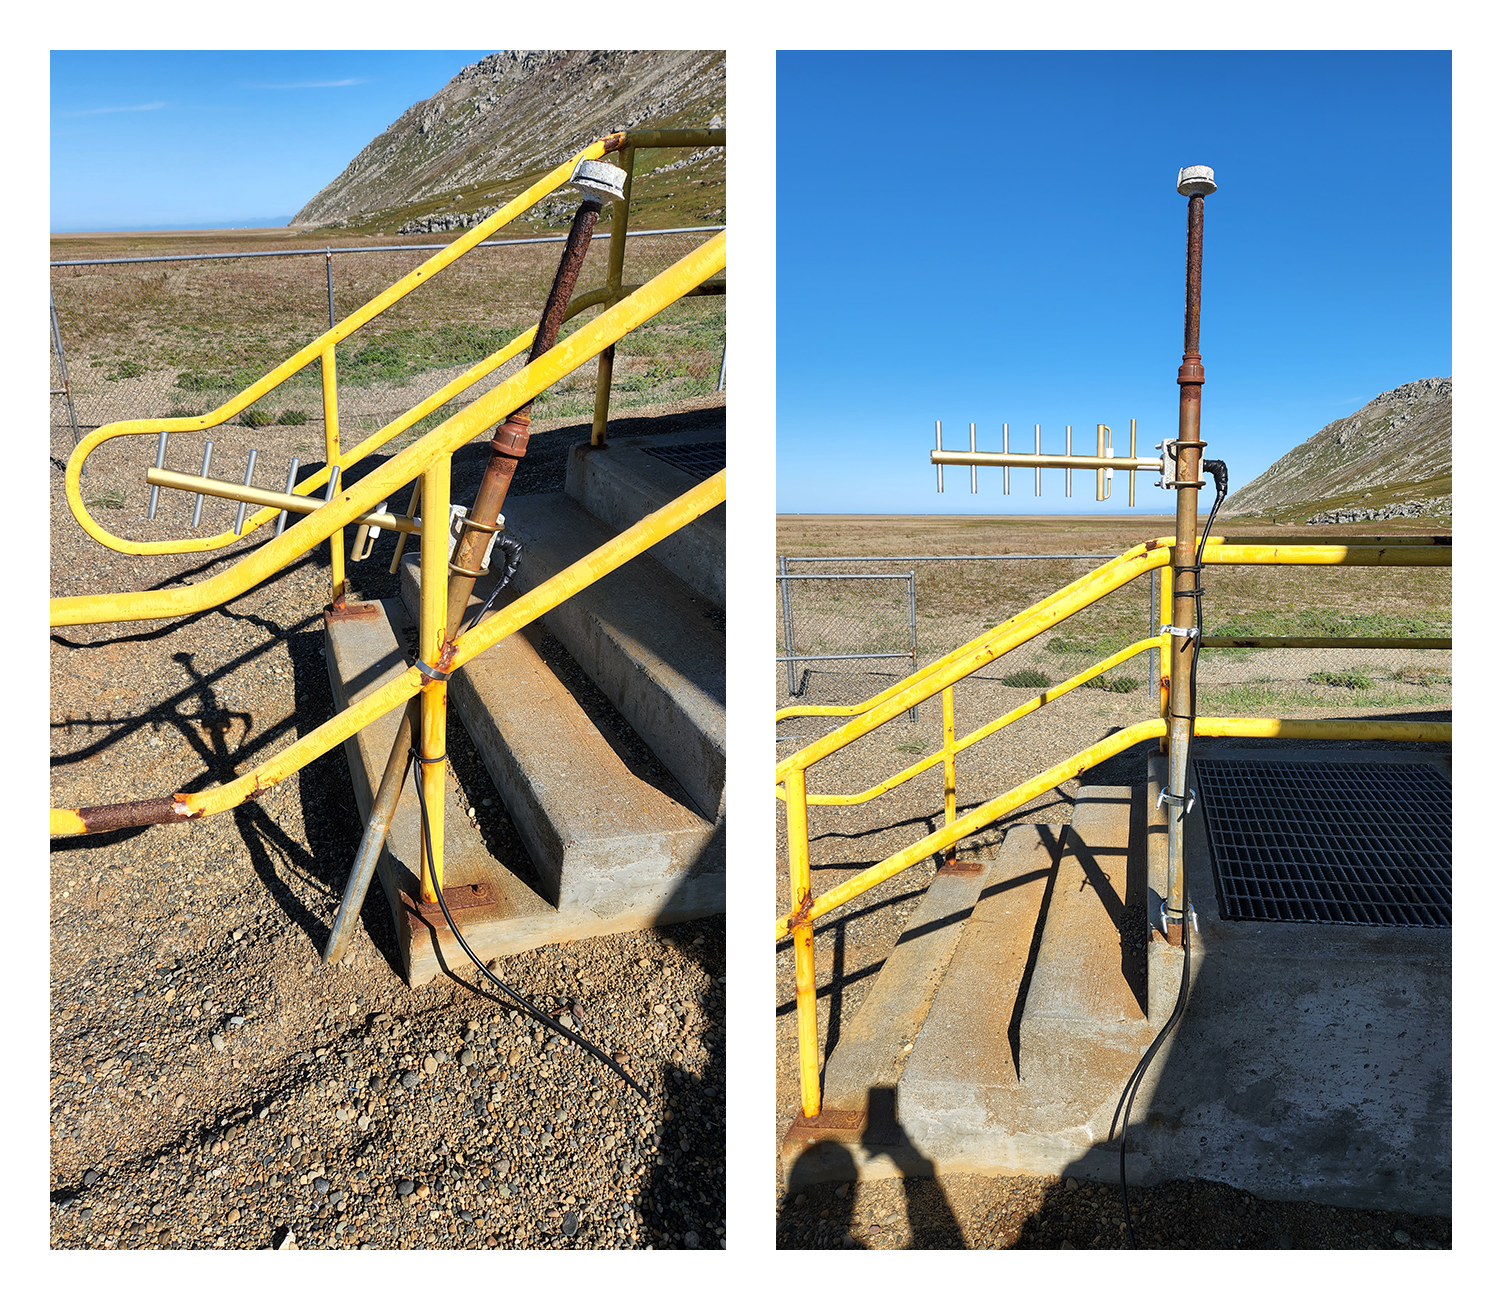 Left photo: Radio antenna leaning at an angle on railing. Right photo: Antenna reattached to railing, sticking vertically up in the air.